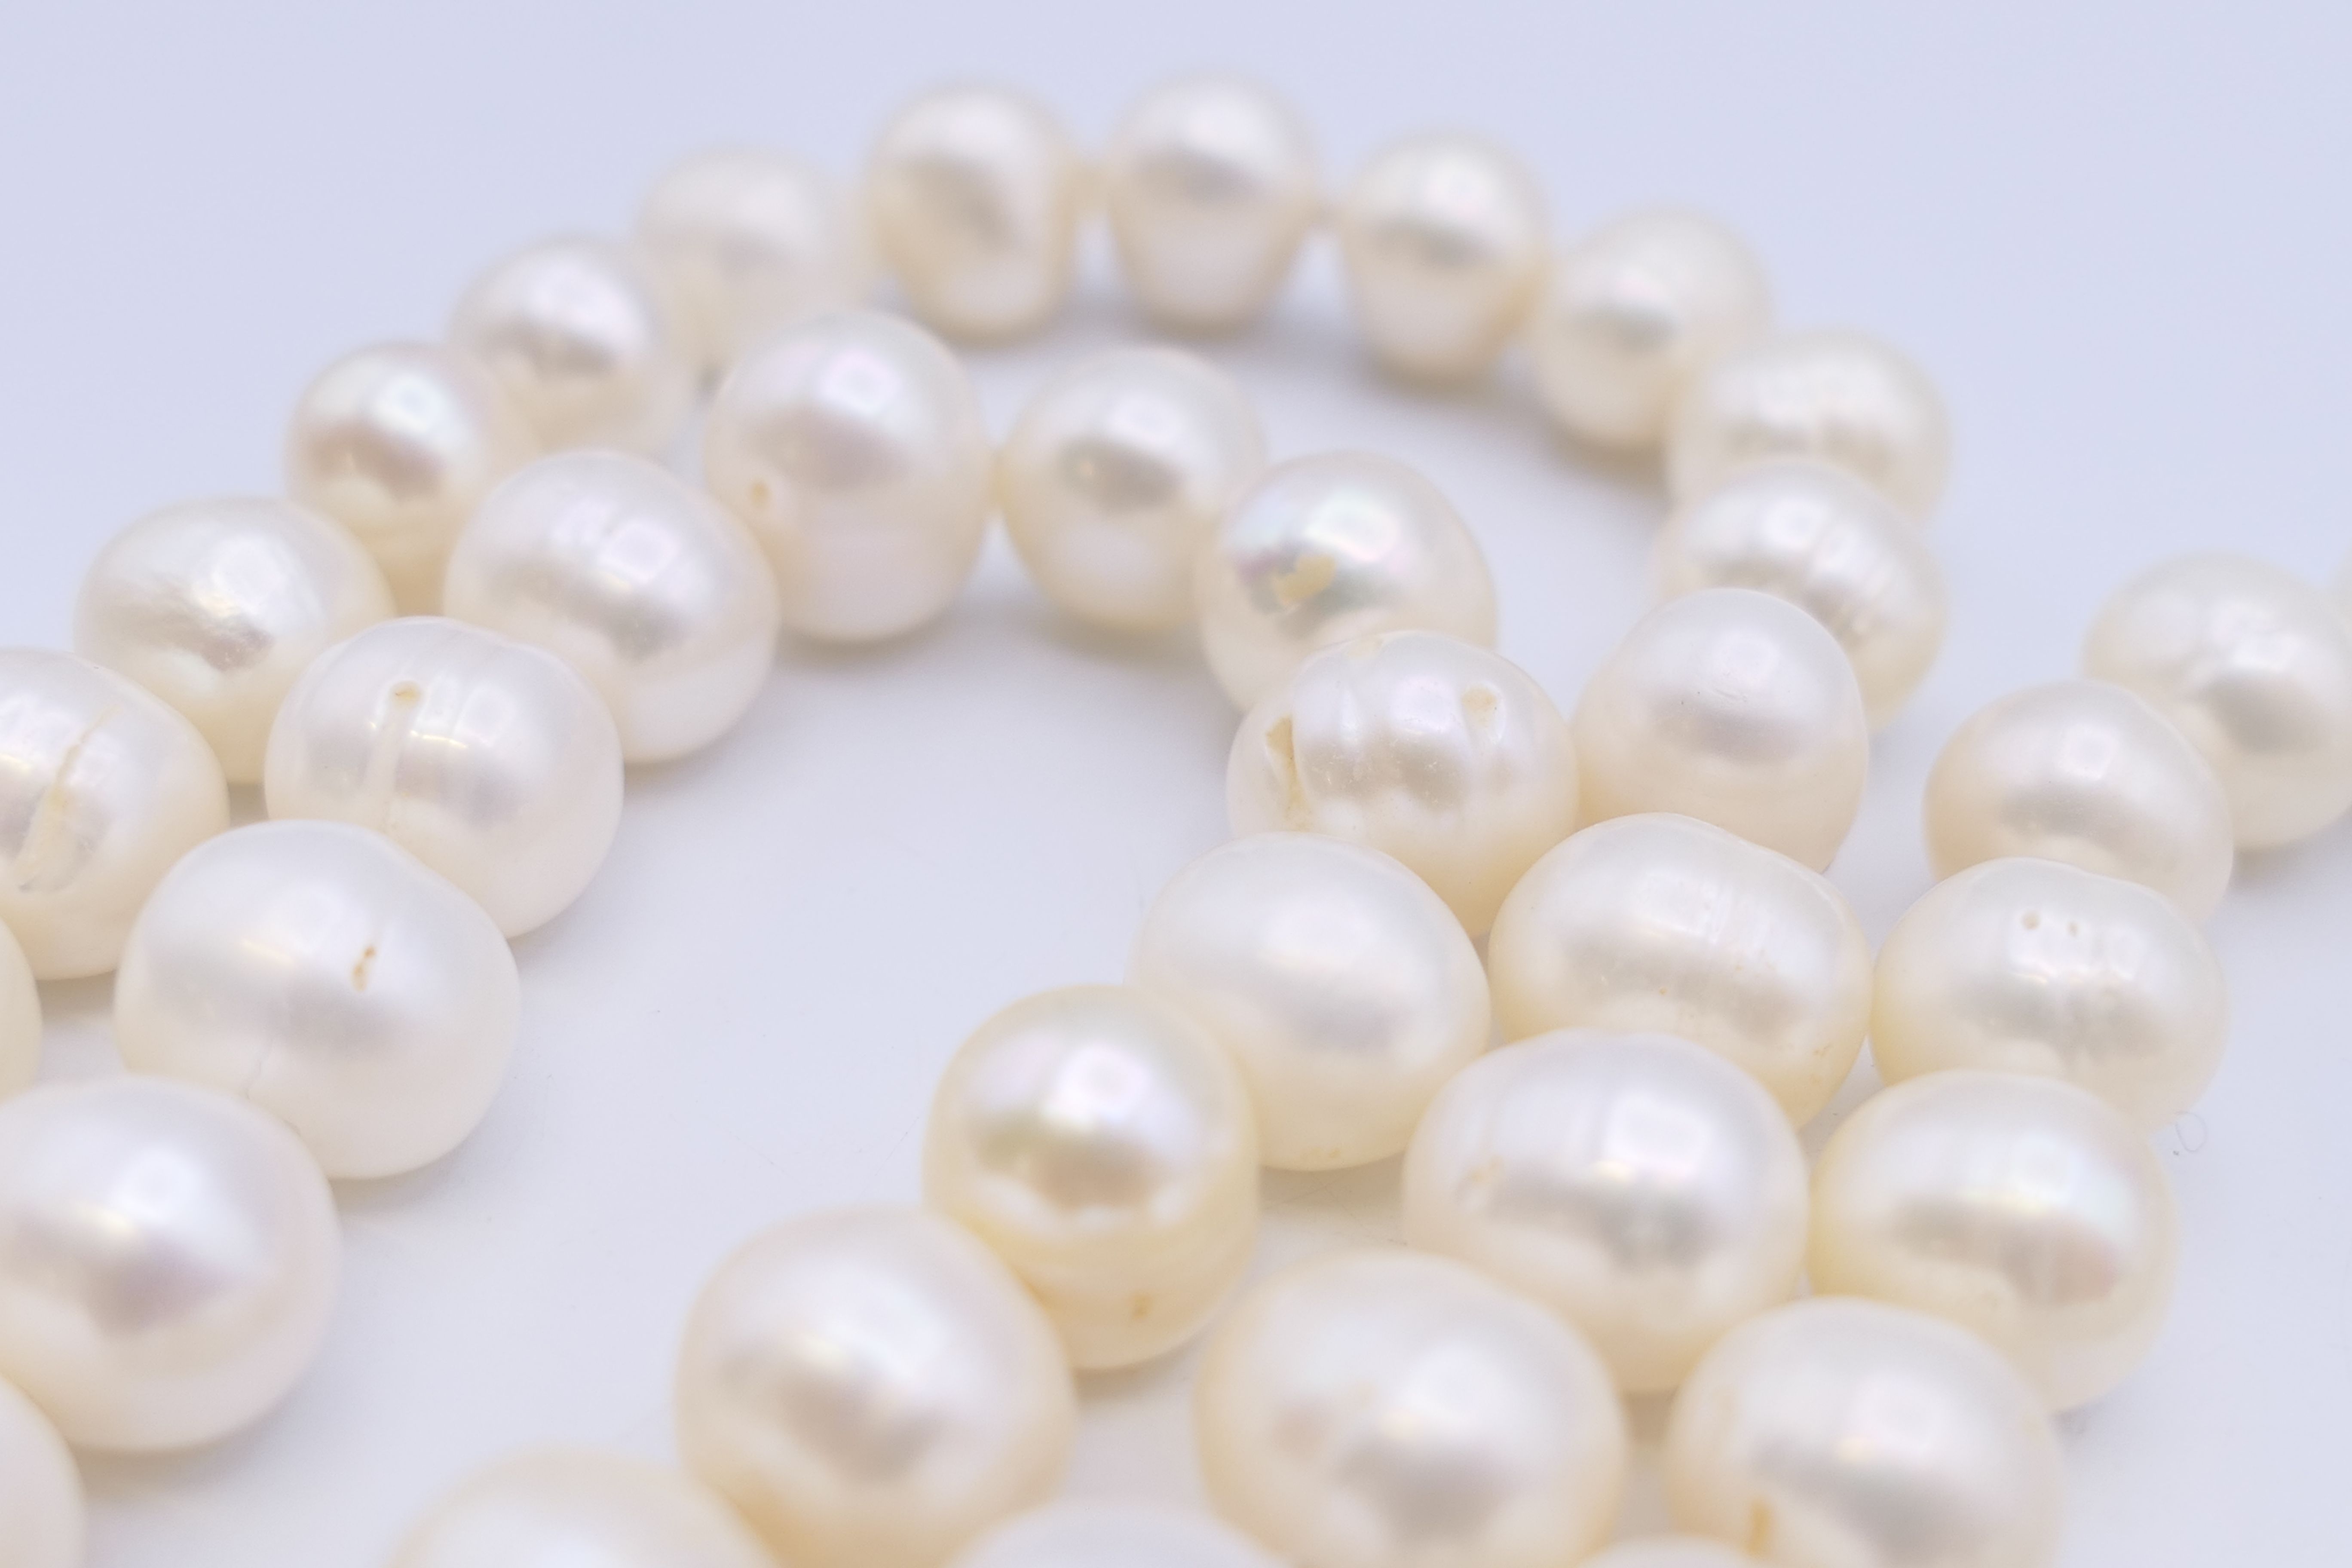 A Stellar & Dot designer pearl necklace, another pearl necklace and a bracelet. - Image 3 of 11